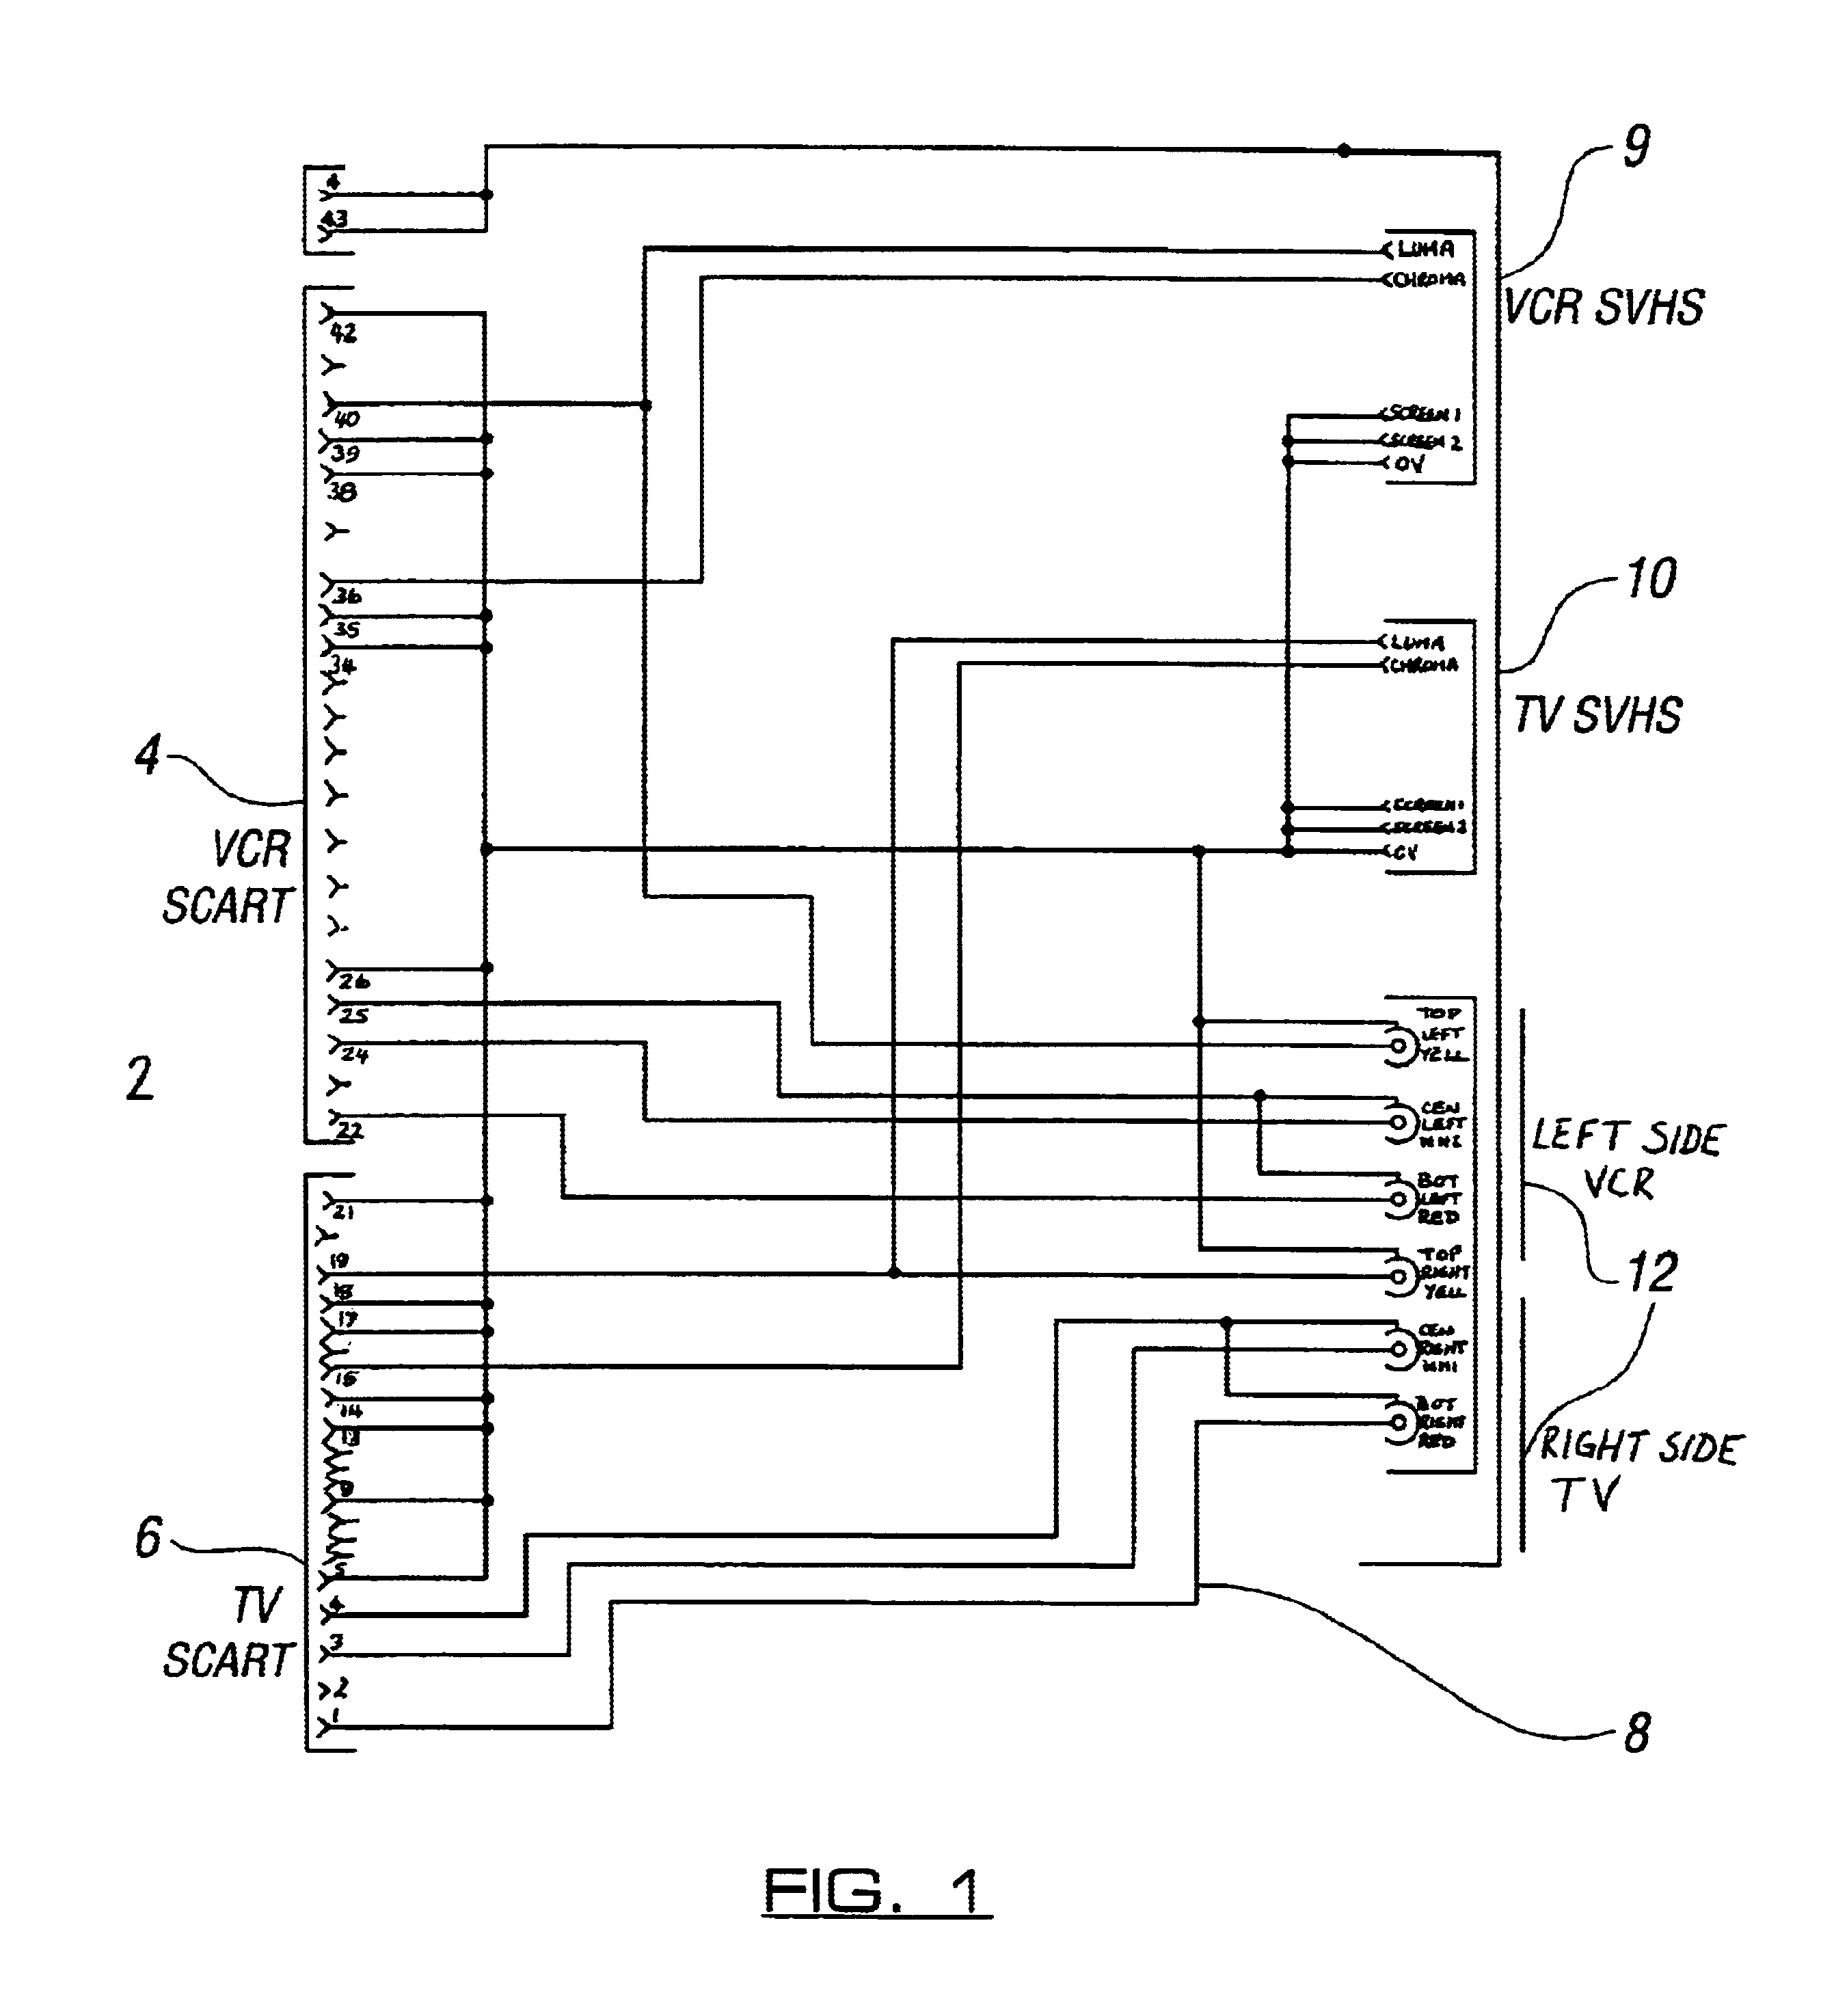 Adaptor to allow apparatus with non-scart connectors to connectors to connect to apparatus with scart connectors